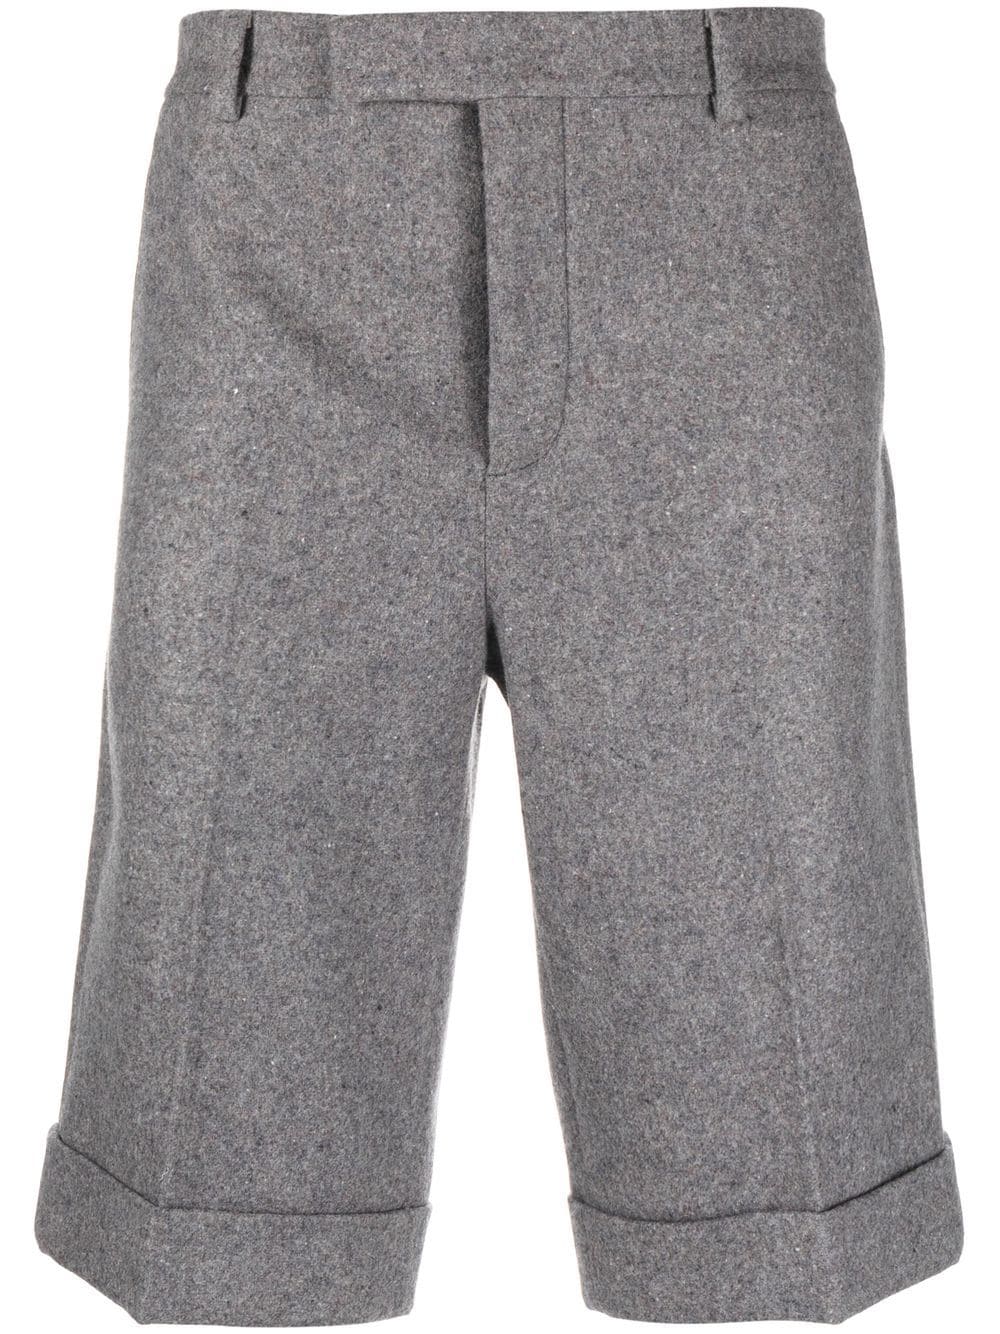 GUCCI TAILORED CASHMERE-WOOL SHORTS